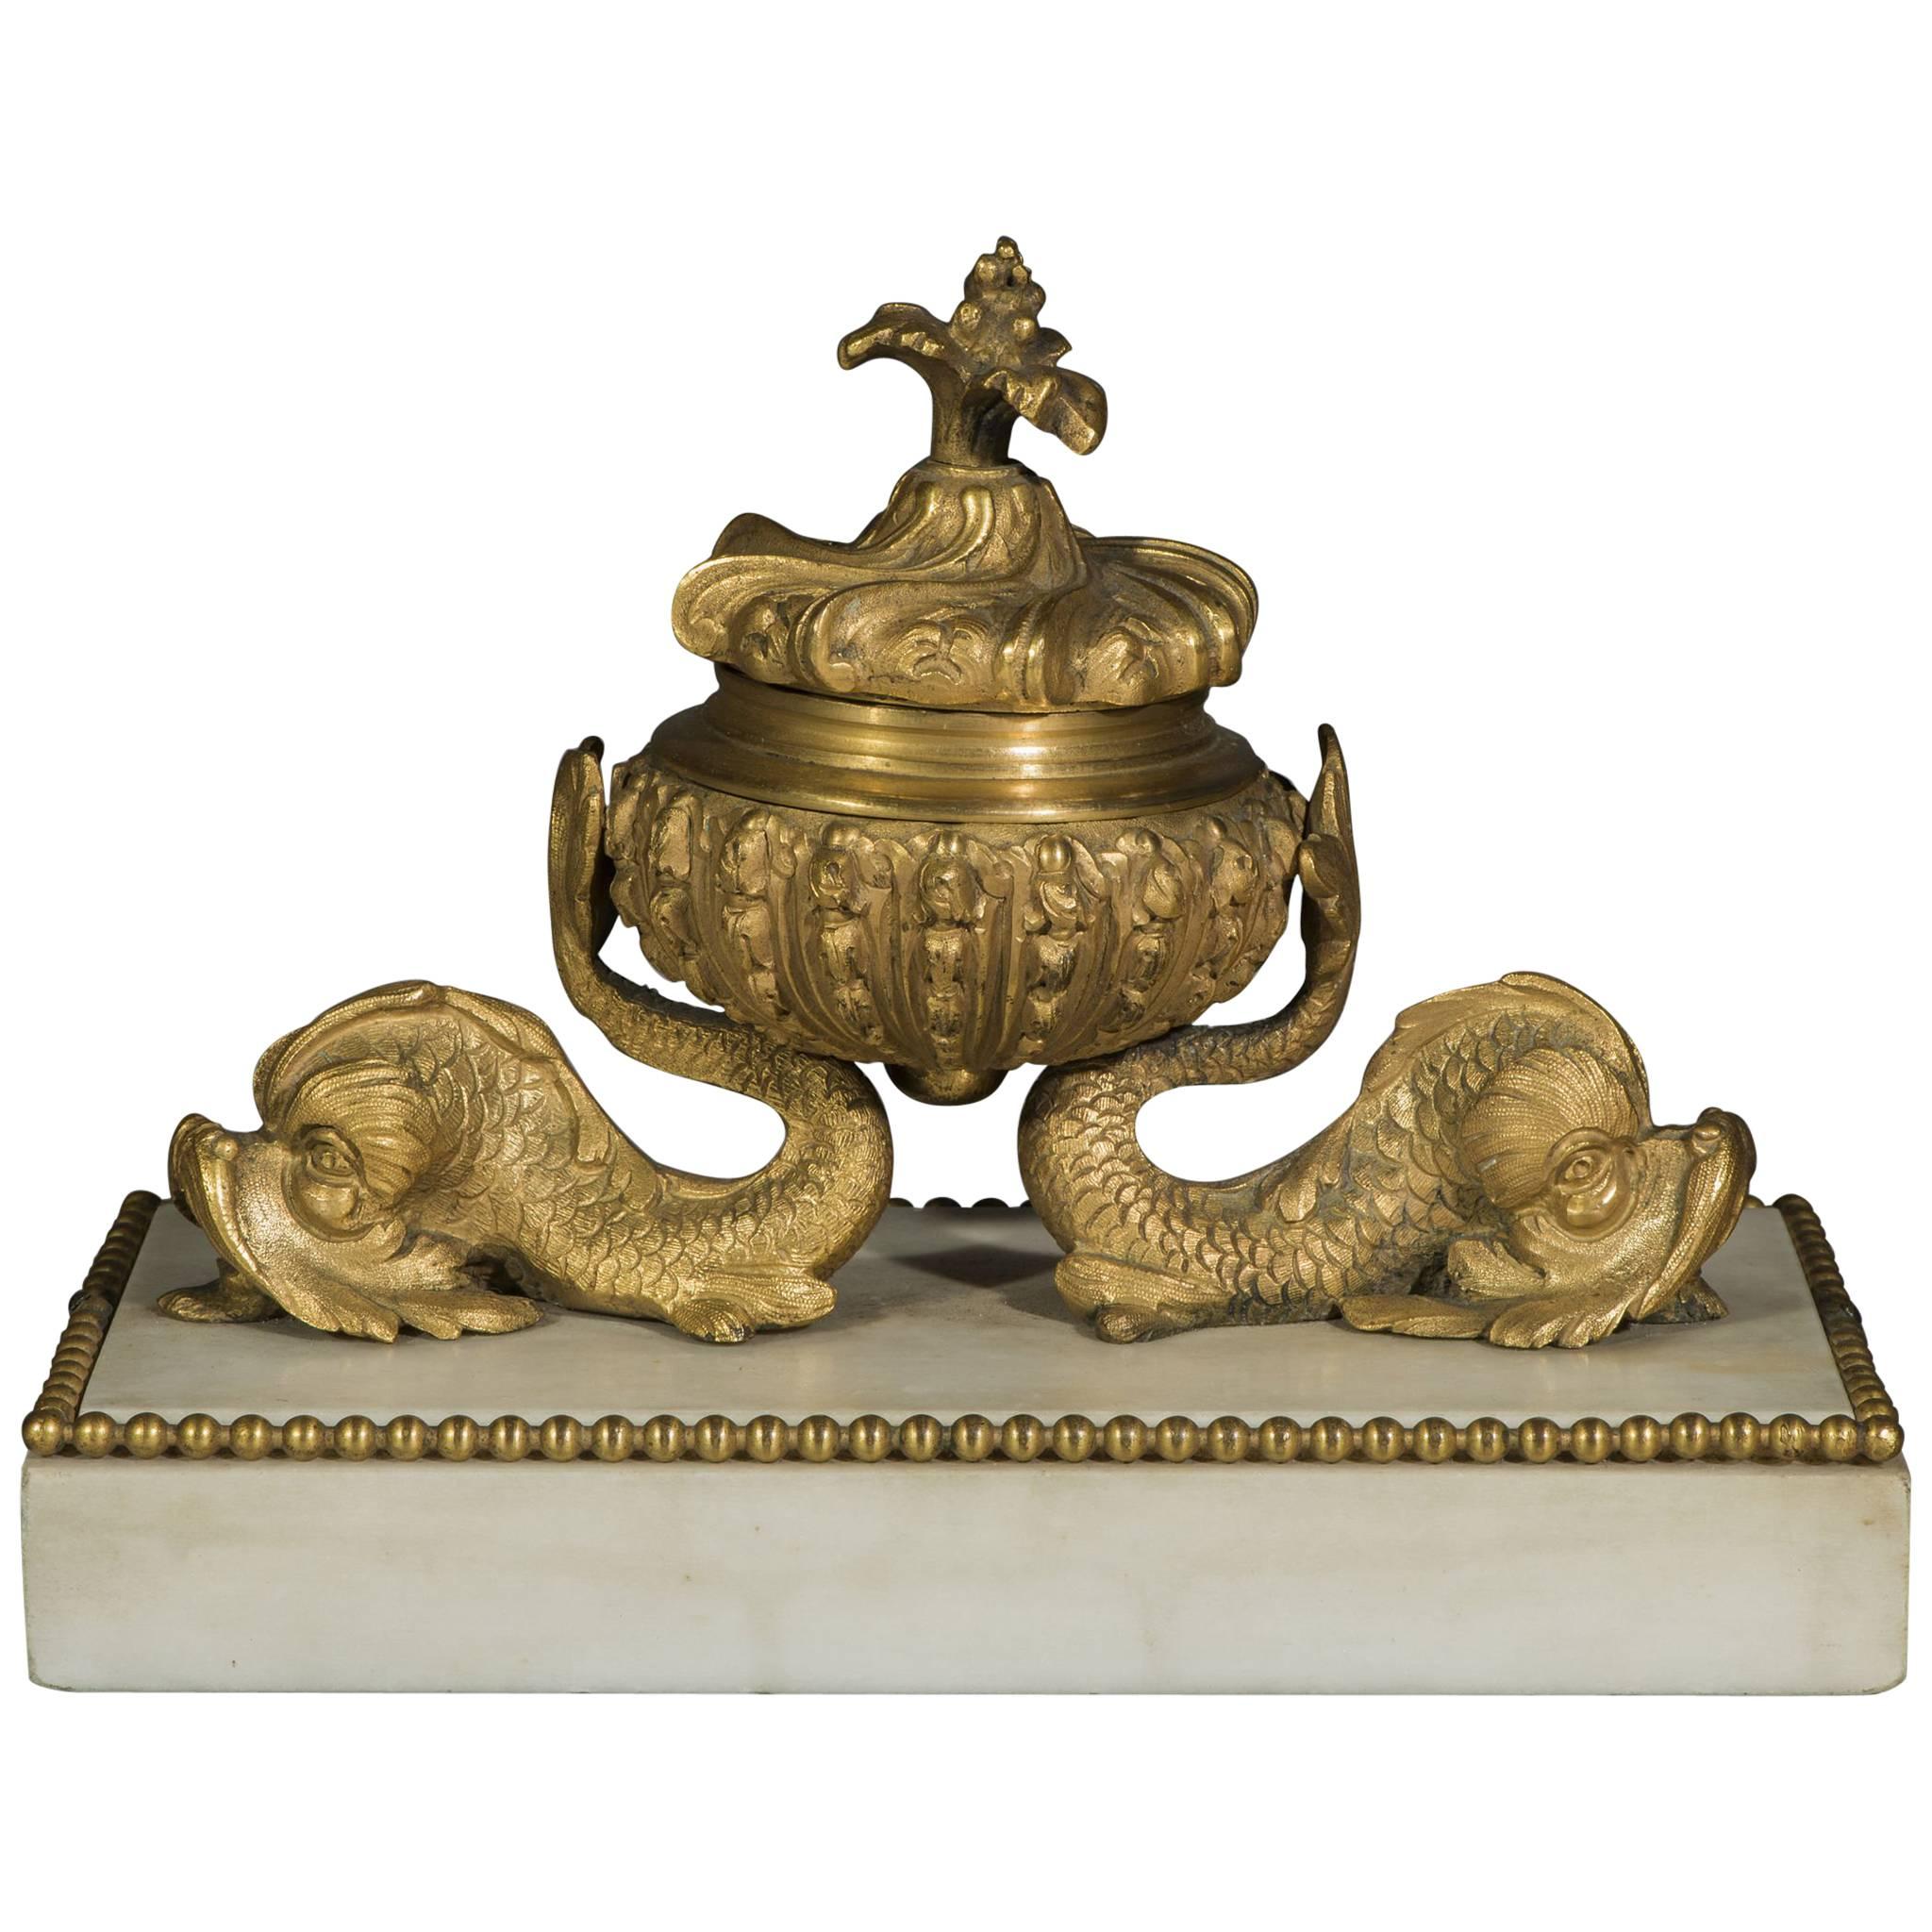 Early 19th Century Regency Period Gilt Ormolu Dolphin and Marble Inkstand